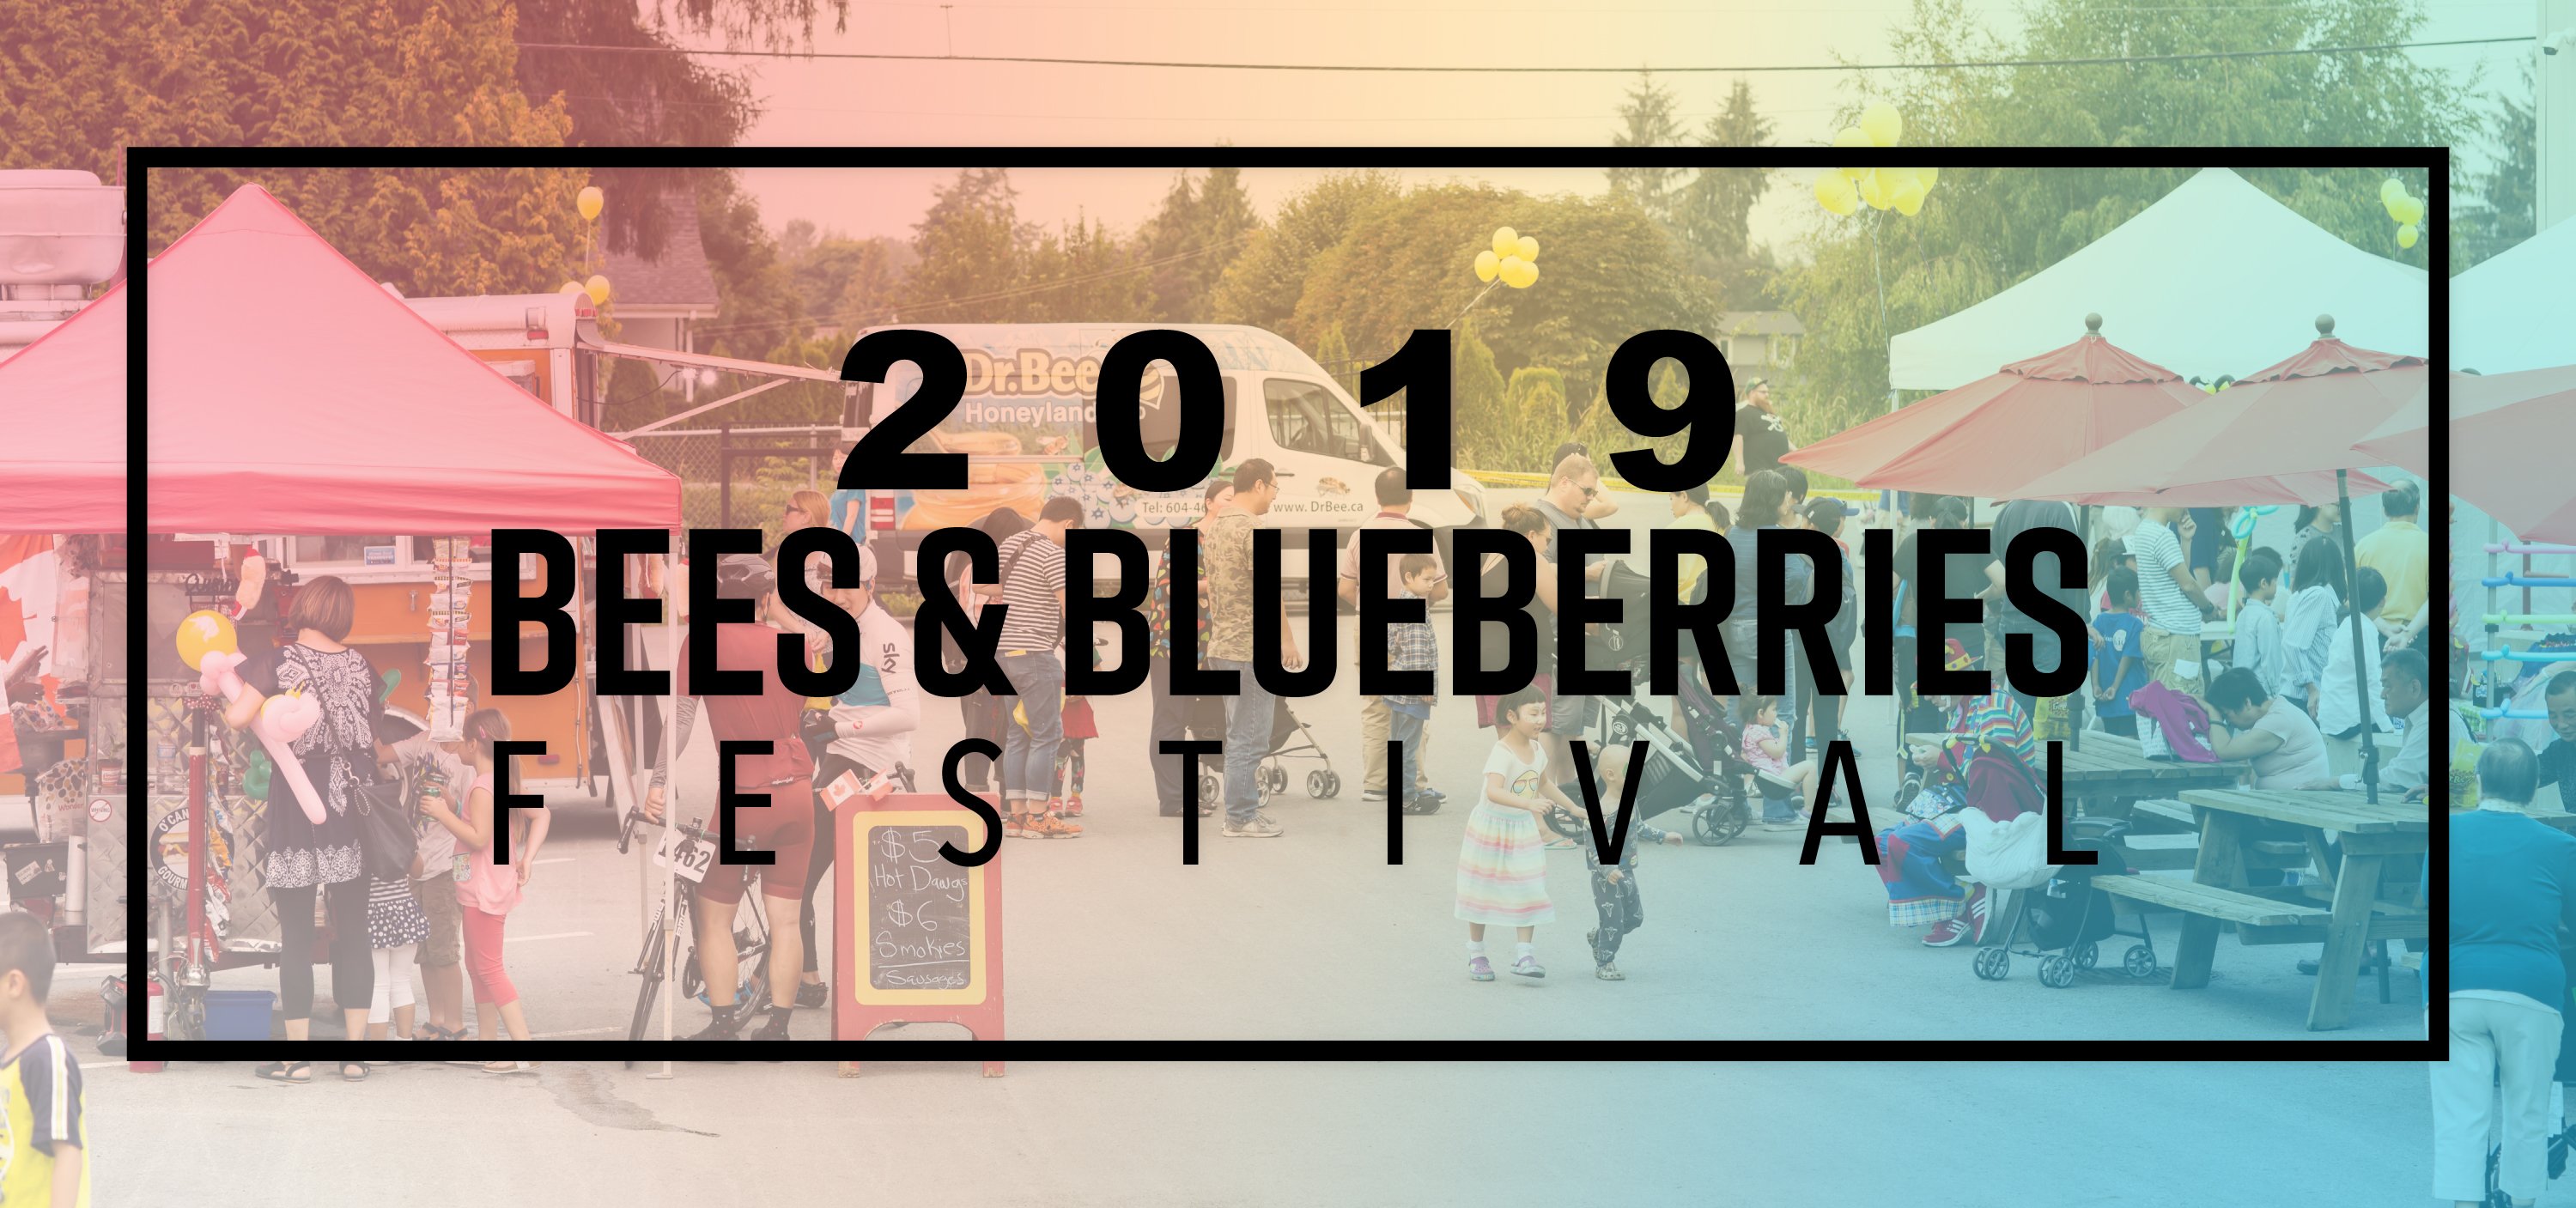 Bees and Blueberries Festival